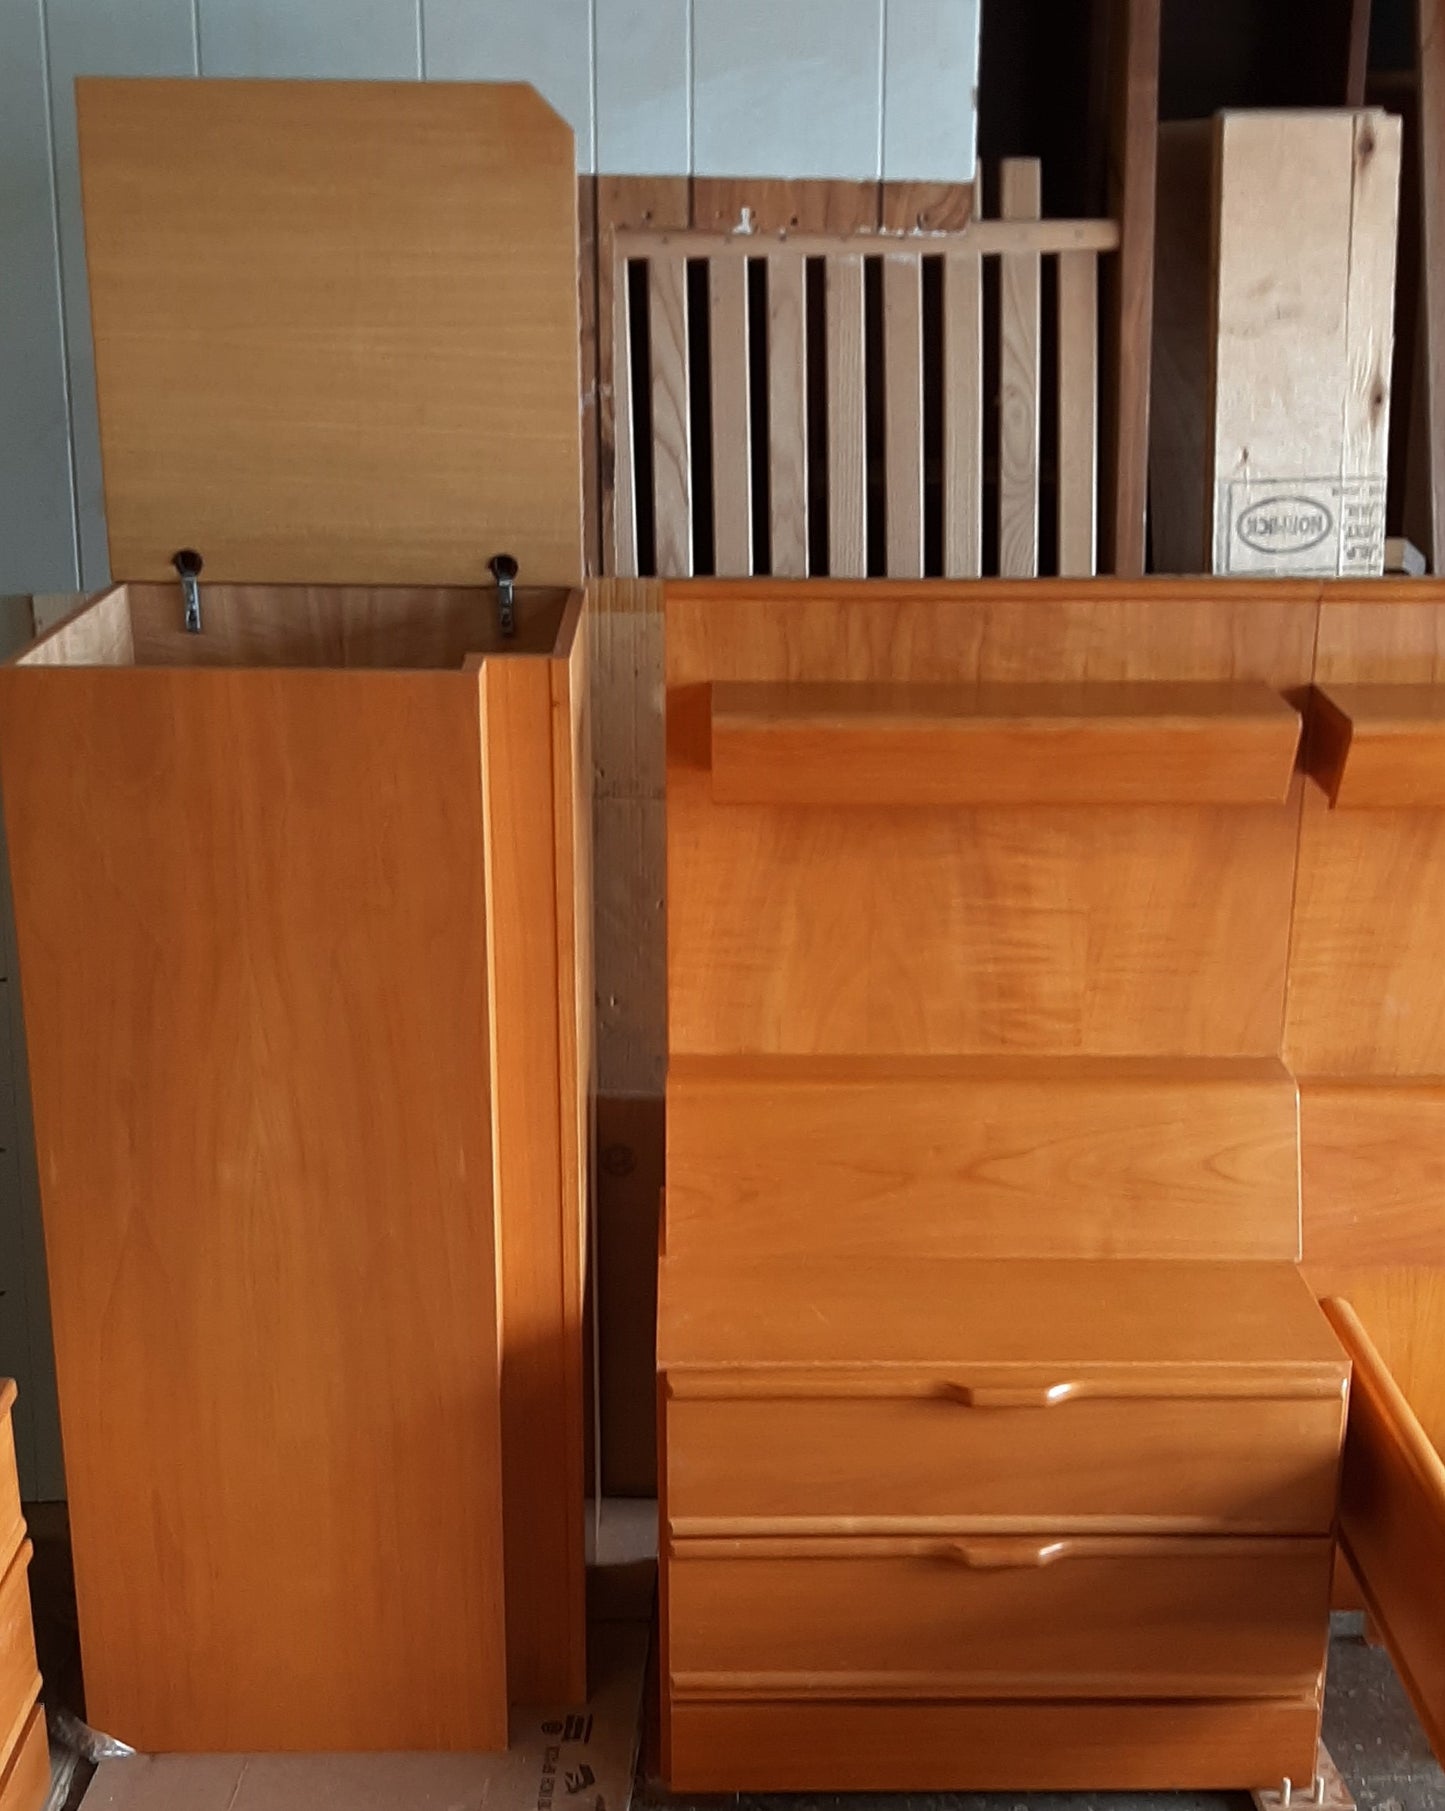 RESTORED MCM bedroom set:  platform bed w nighstands, slats & matresses and dressers, made in Germany, perfect